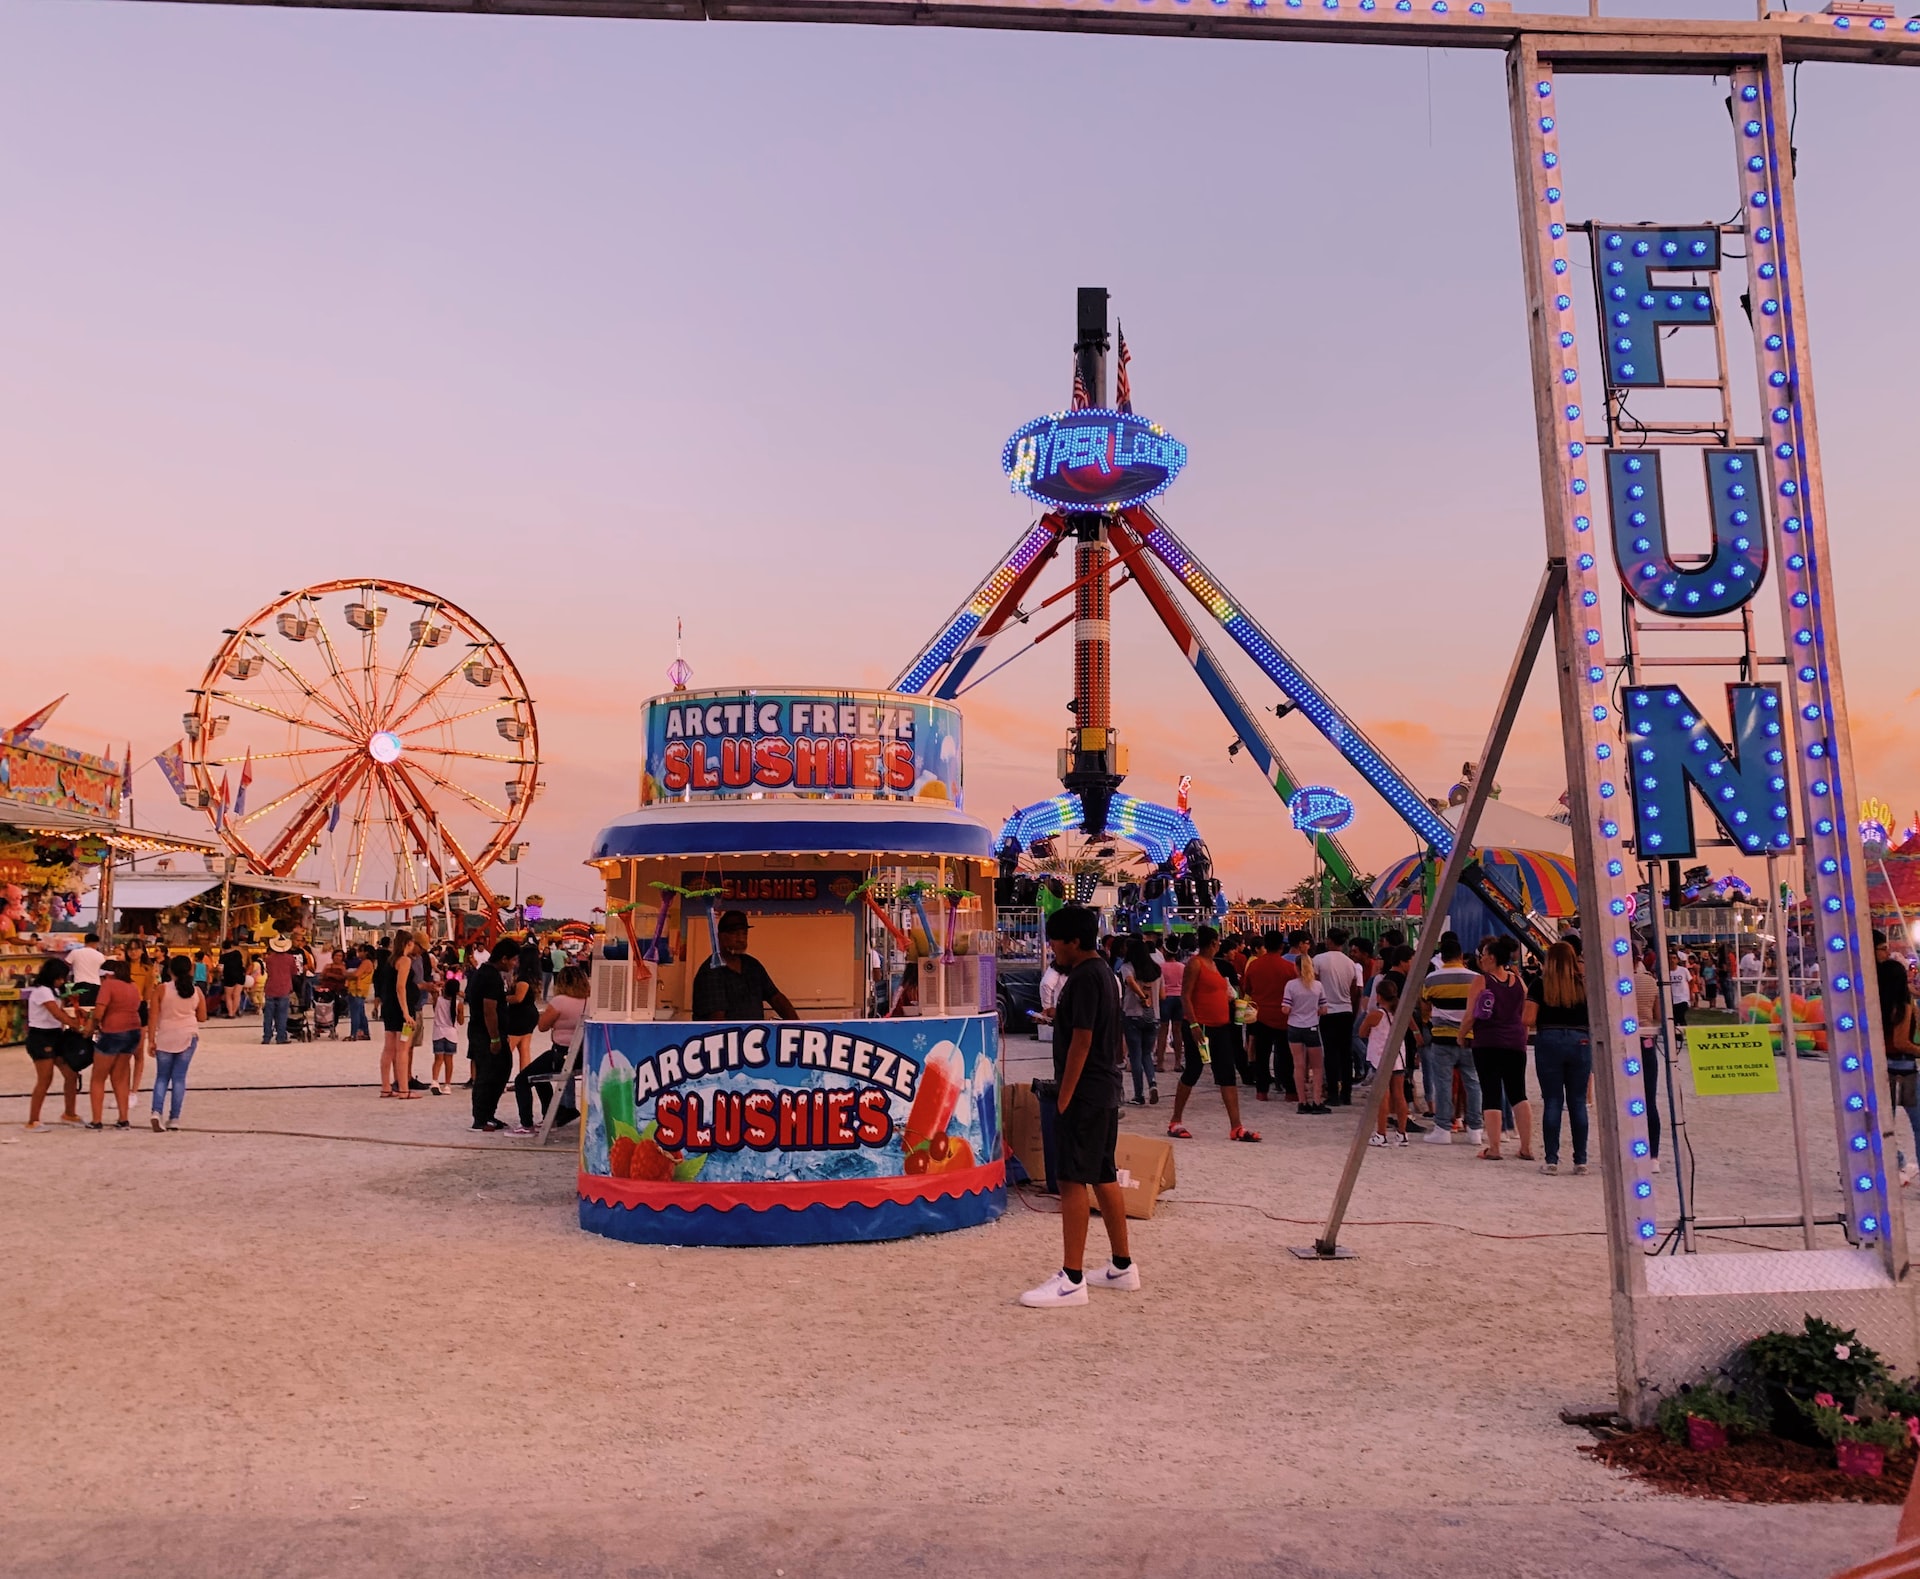 Fairs in the United States